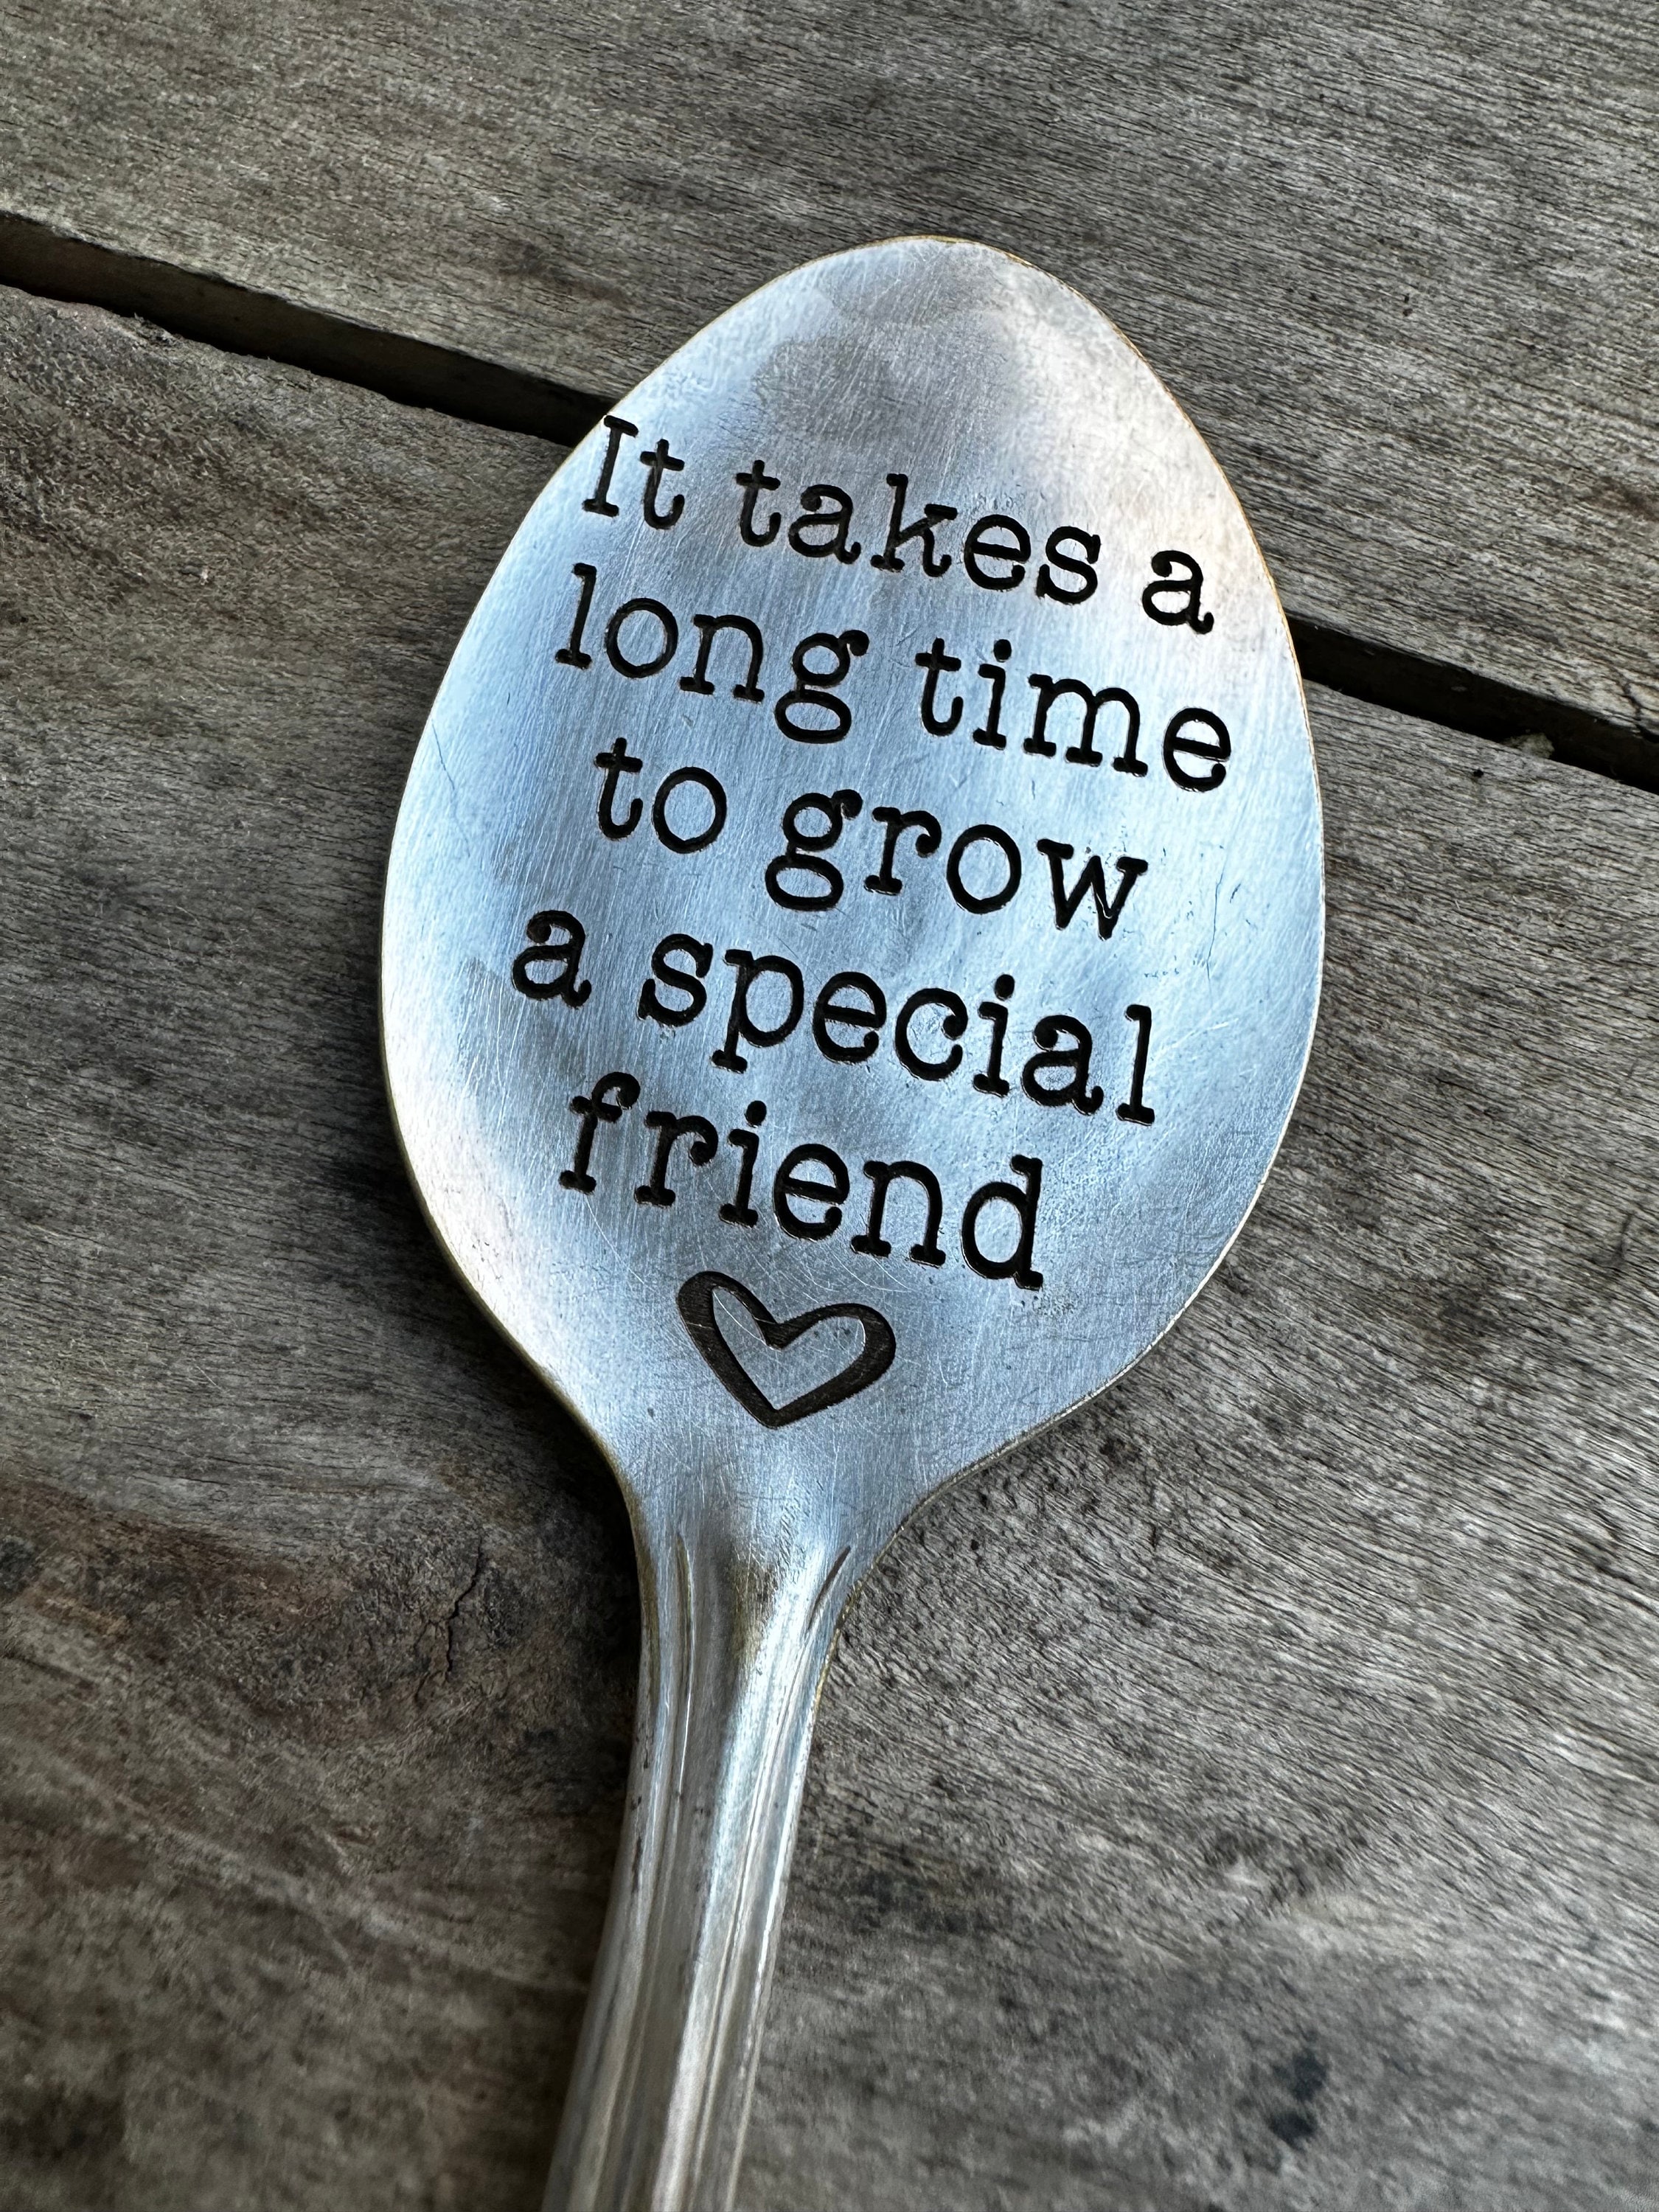 Just married gifts - Funny gifts - Trendy spoon - Unique gifts - Fresh out  of f spoon - lol surprise gifts - Engraved spoon - 7 inches - Romantic  gifts for women – BOSTON CREATIVE COMPANY